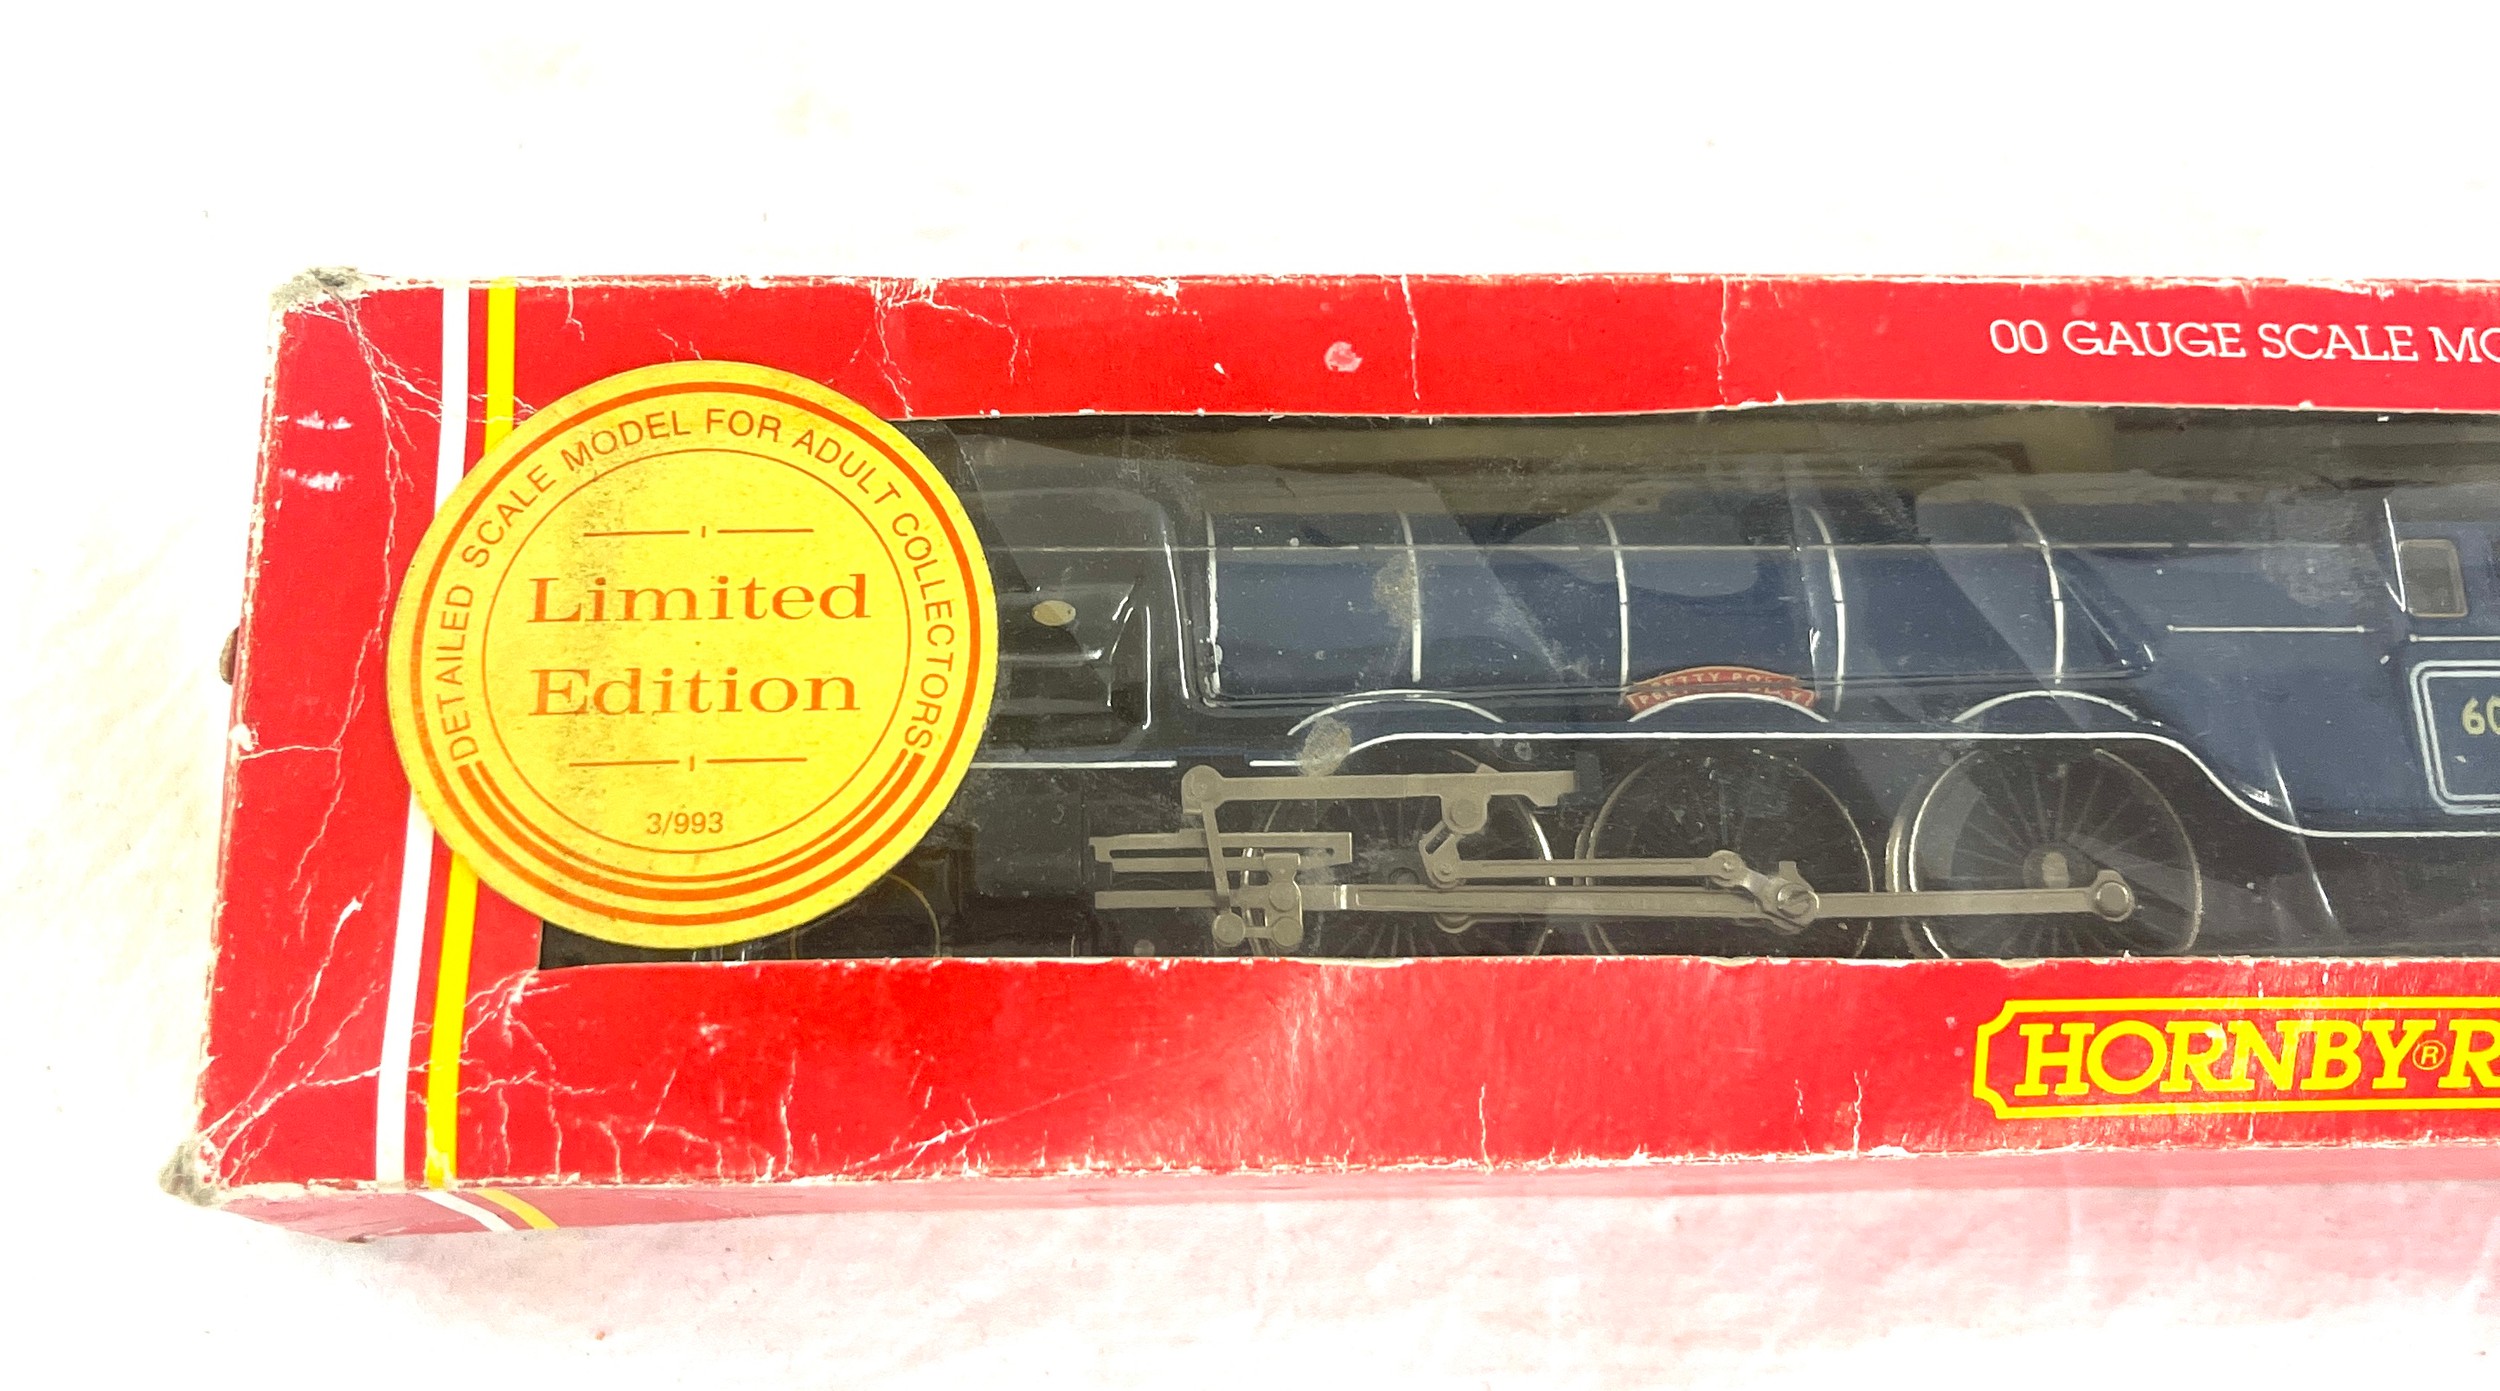 Boxed Hornby Railways 00 Gauge Scale Model Pretty Polly 60061, box is damaged - Image 2 of 4